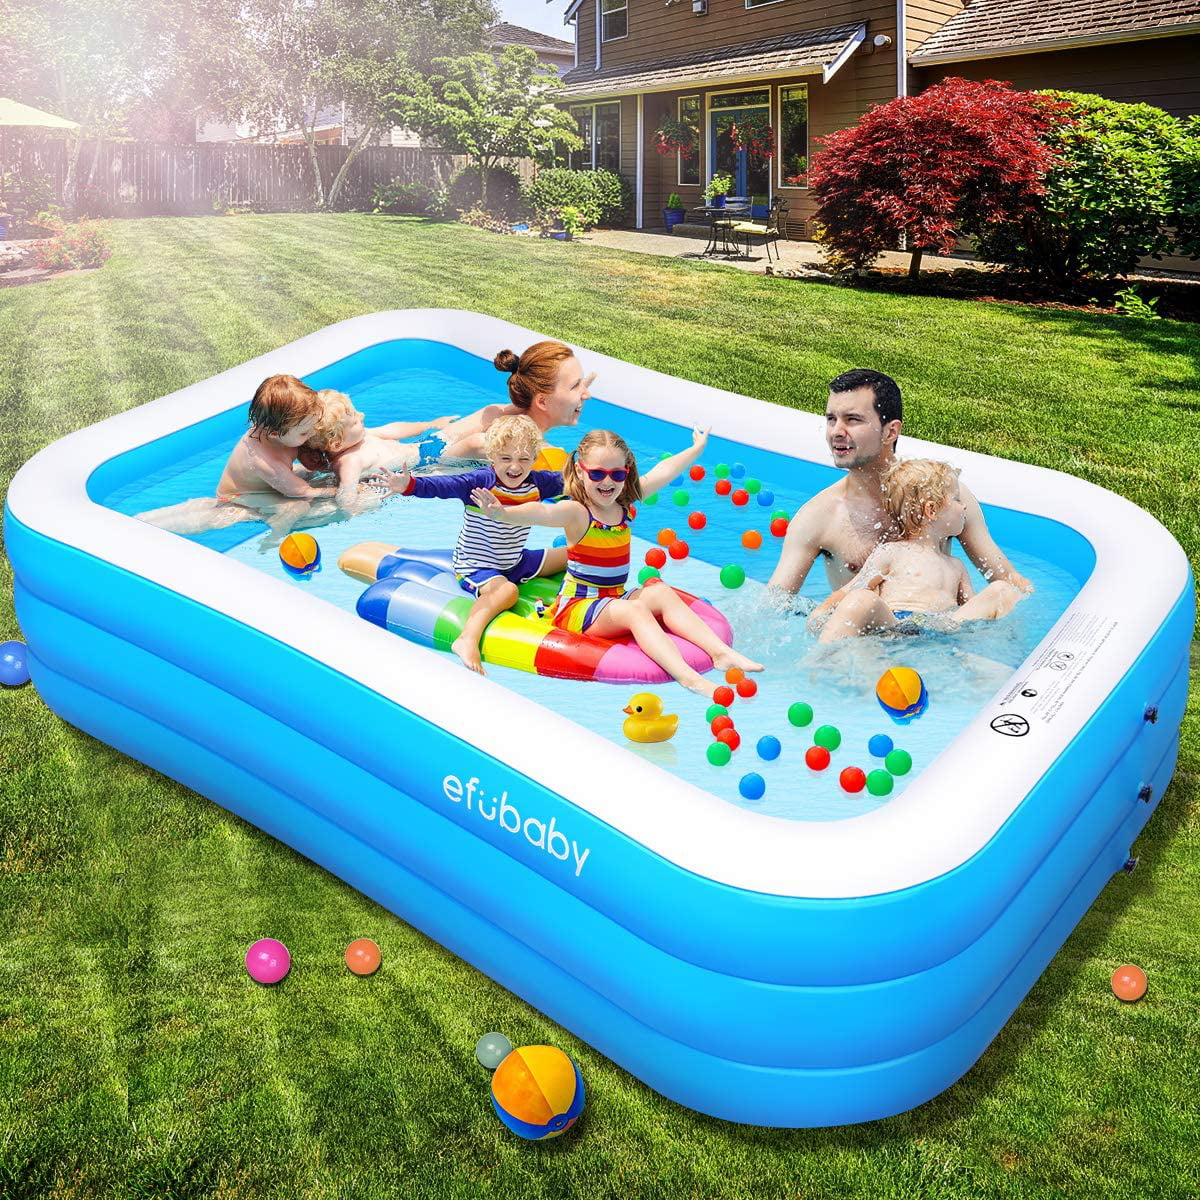 efubaby Inflatable Pool 120 X 72 X 22 Full-Sized Swimming Pools Inflatable Kid Pools Blow up Pool Toddler Pool Family Pool for Baby Kiddie Adult Ages 3+ Outdoor Garden Backyard Ground Party 